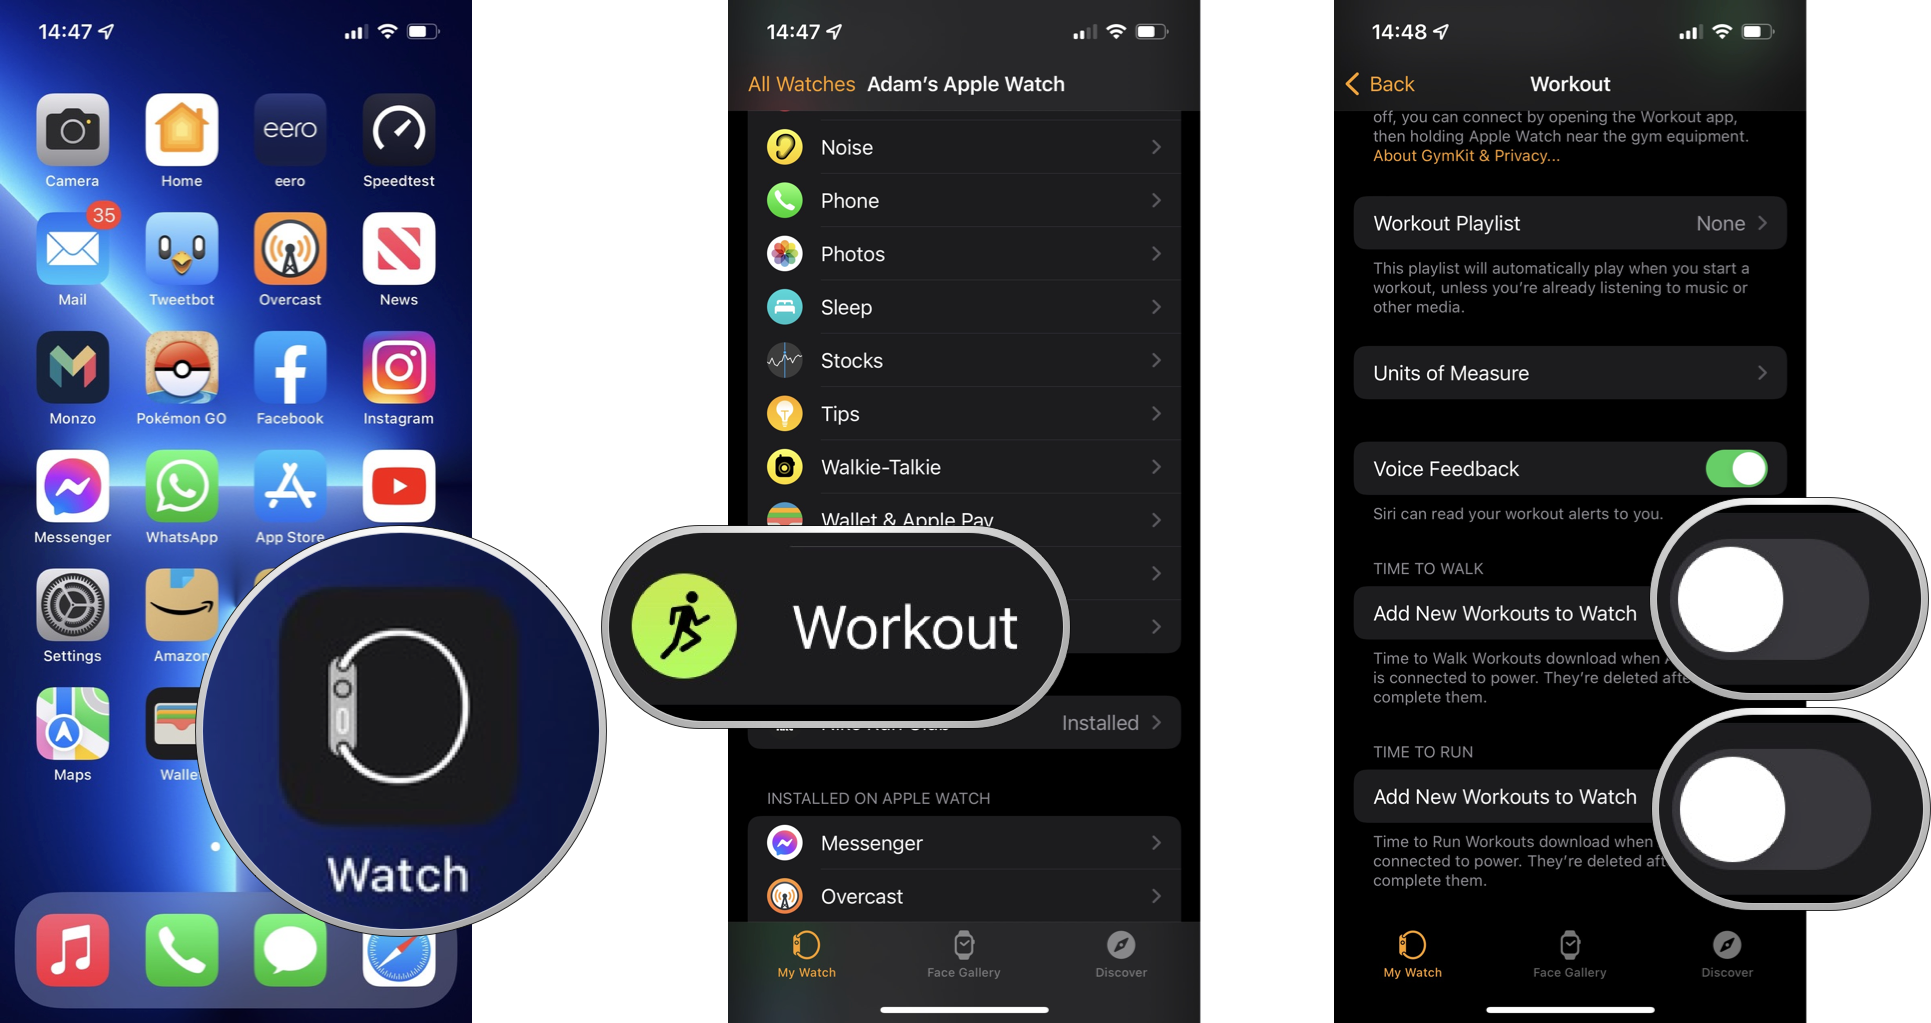 Stop automatic Time to Walk and Time to Run episode downloads on iPhone: Open the Apple Watch app, tap on Workout, under Time to Walk and Time to Run turn the toggles beside Add New Workouts to Watch to the off position.